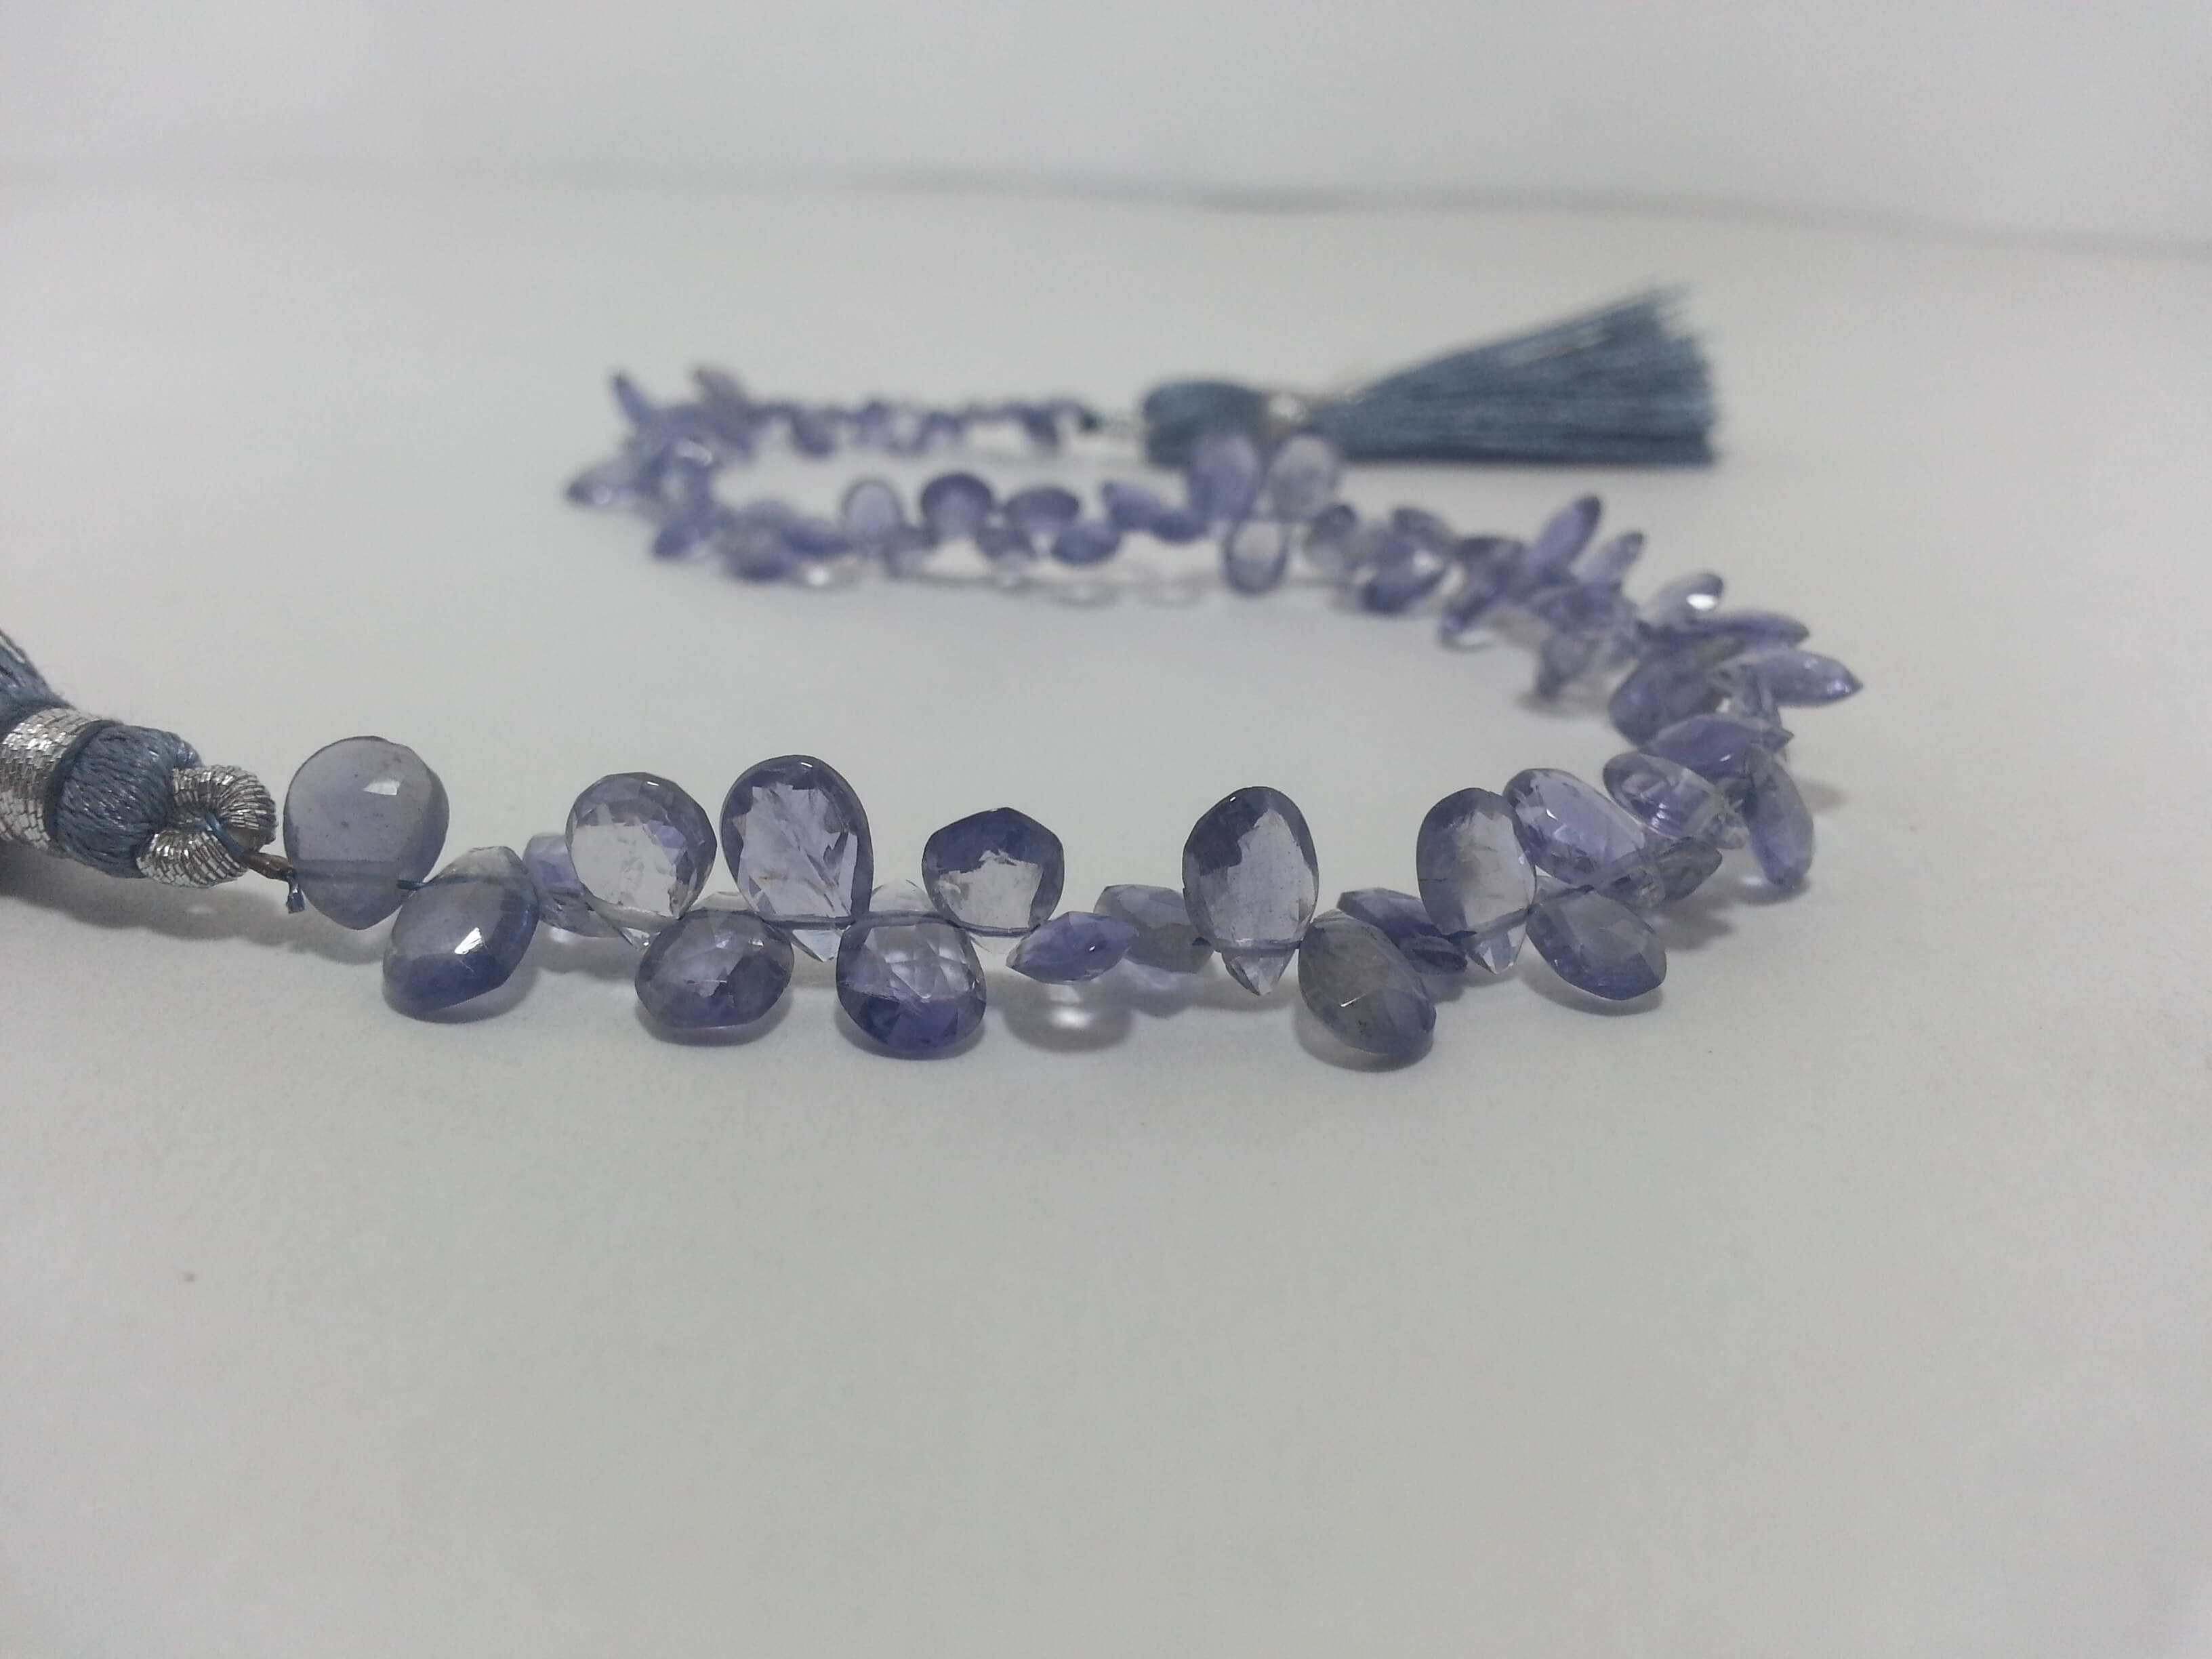 Iolite Pear BeadsNatural Iolite Faceted Cut Pear BriolettesIolite Gemstone BriolettesIolite Gemstone Beads6-7 MM13 PiecesSI-3213